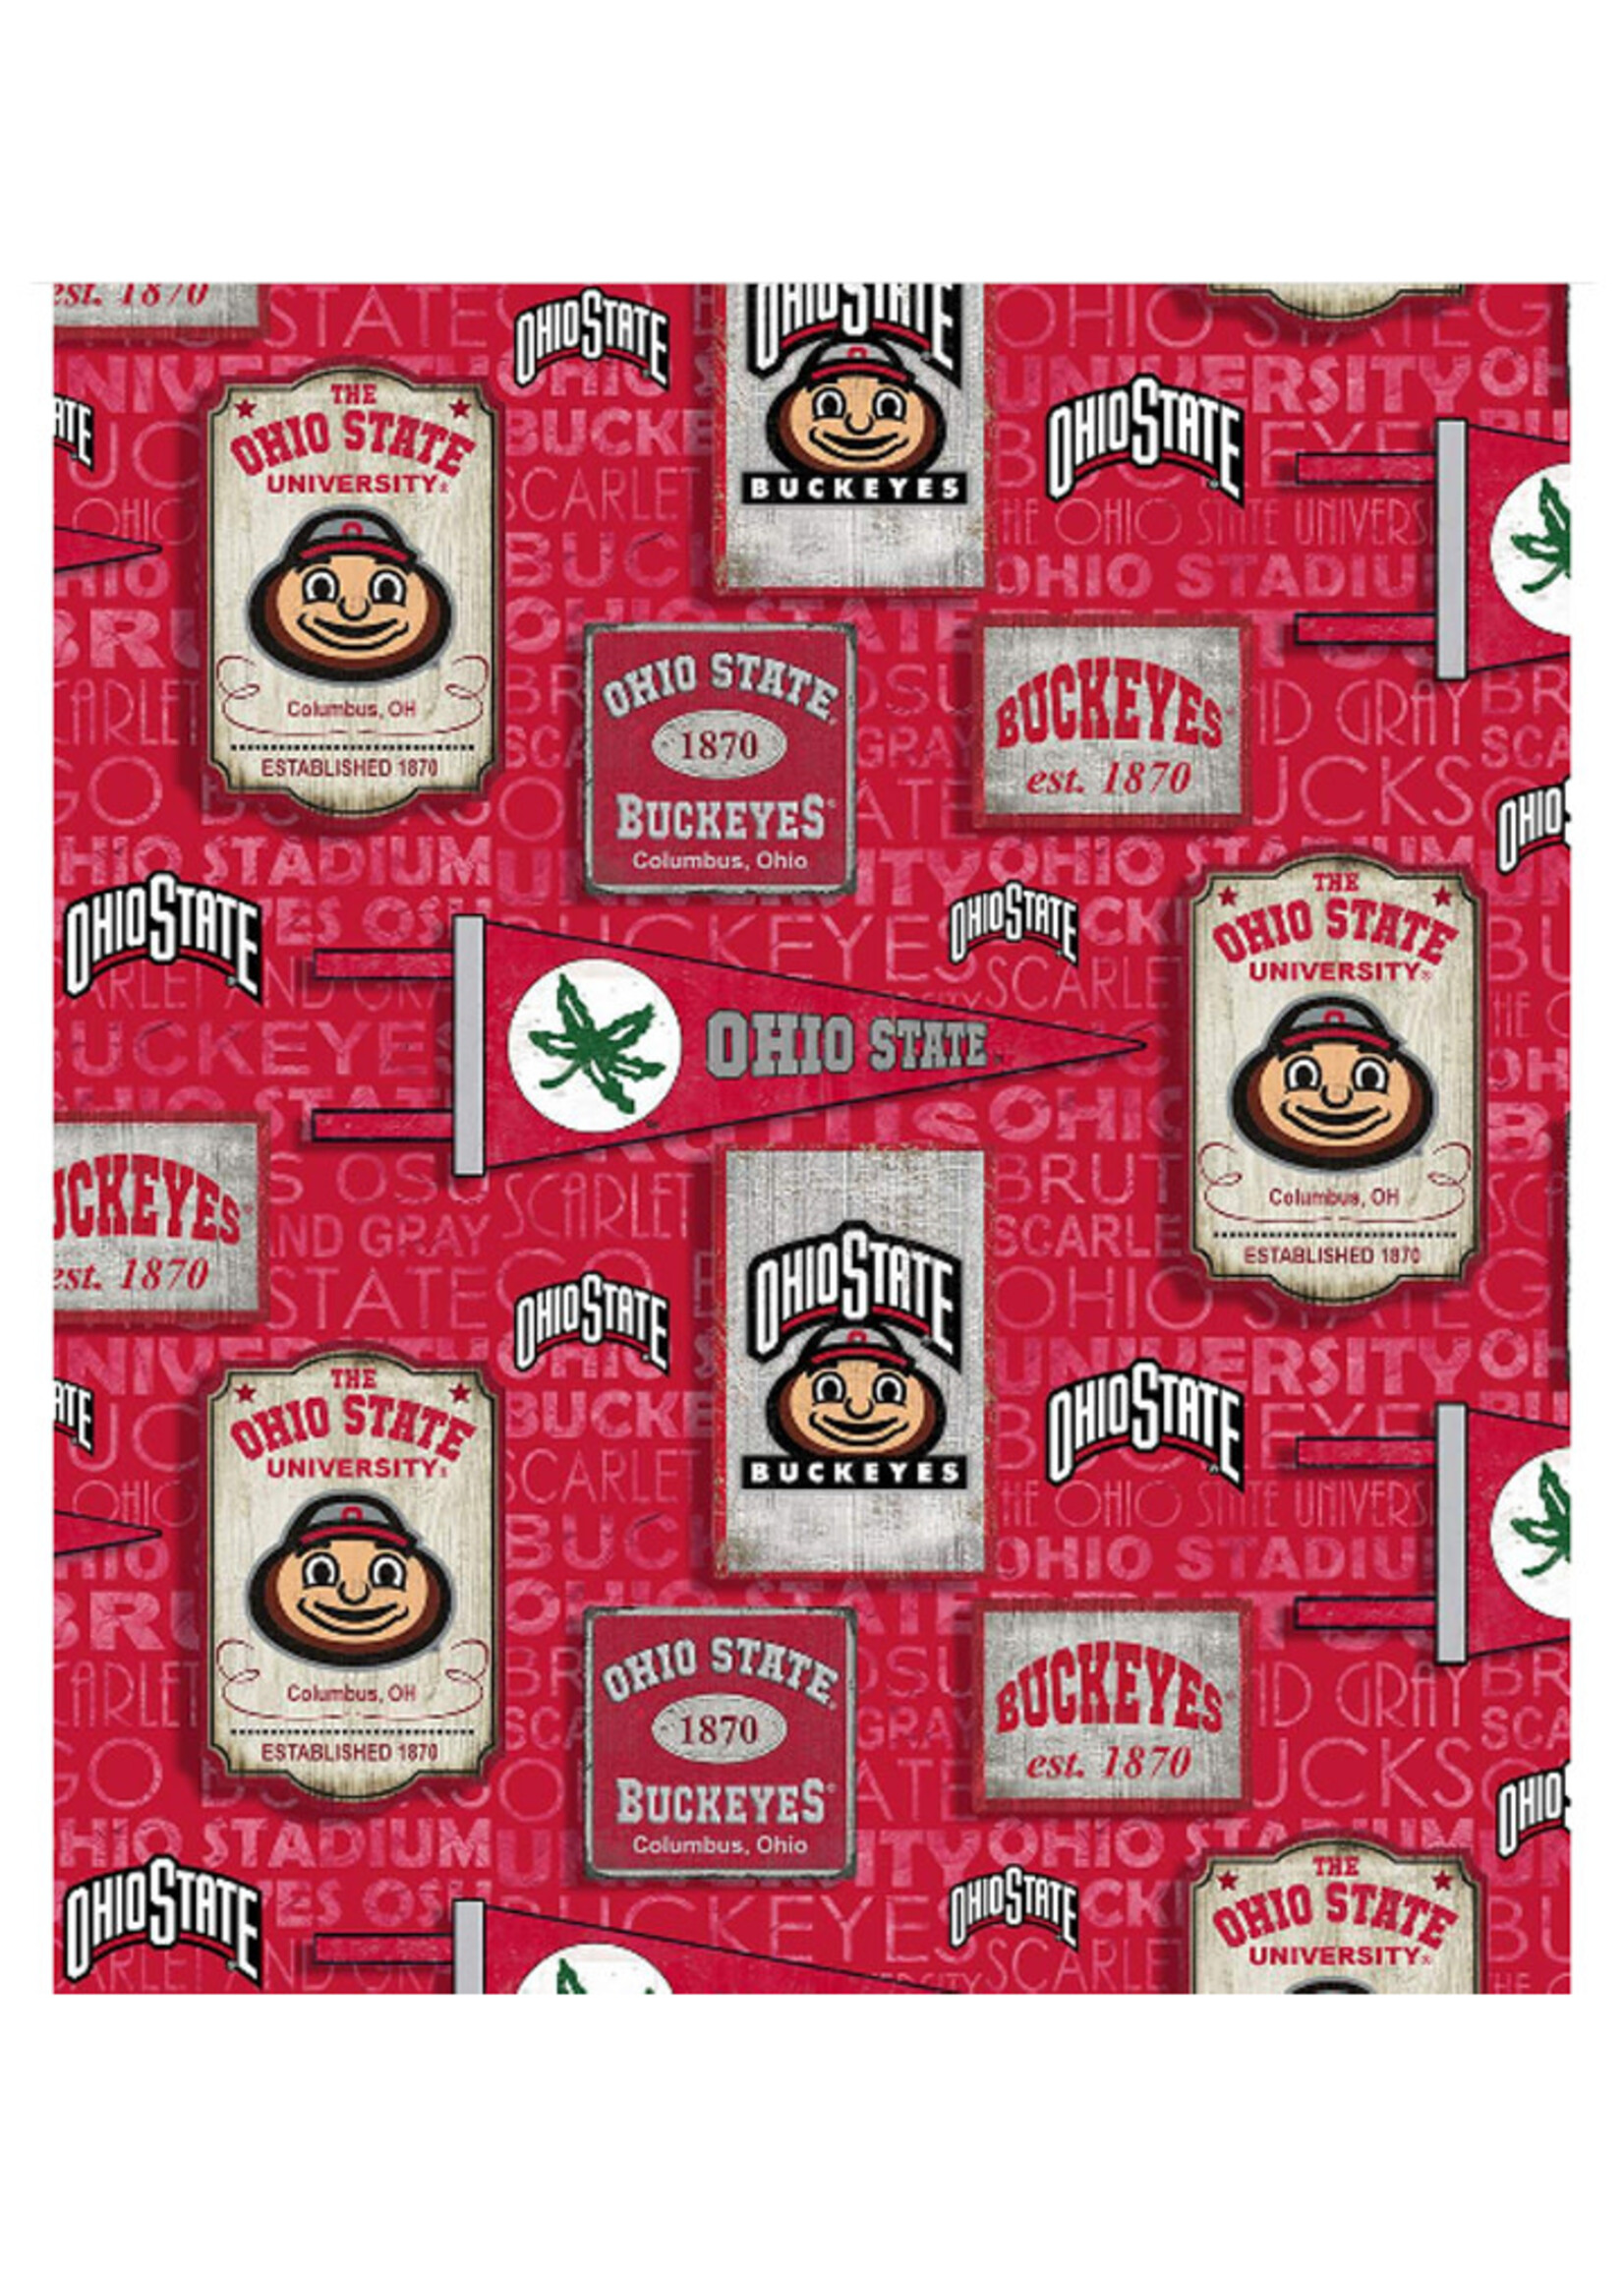 Ohio State Buckeyes Vintage Pennant Cotton Material 15ydsx42in